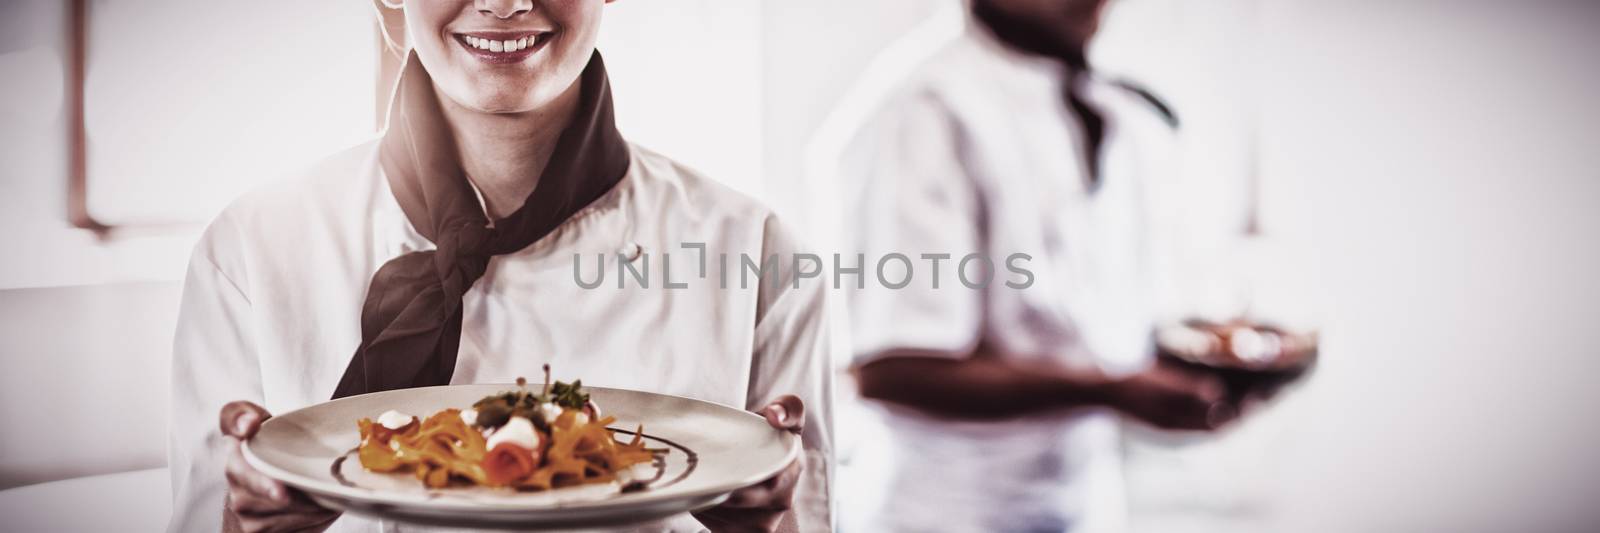 Happy head chef presenting her food in the commercial kitchen while chef working behind her